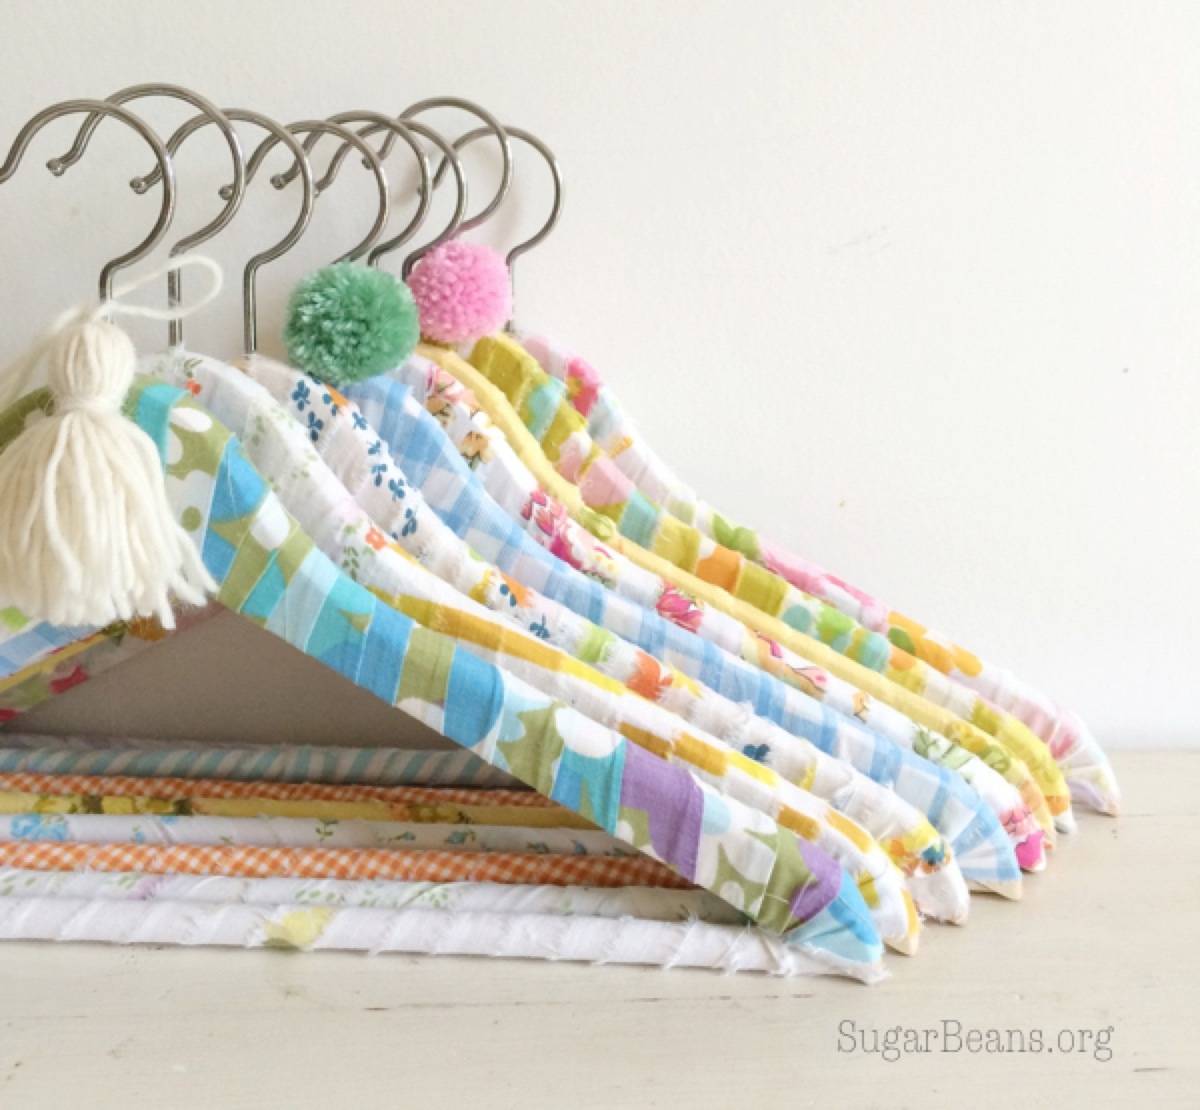 99 ways to use fabric to decorate your home | Wrapped coat hangers